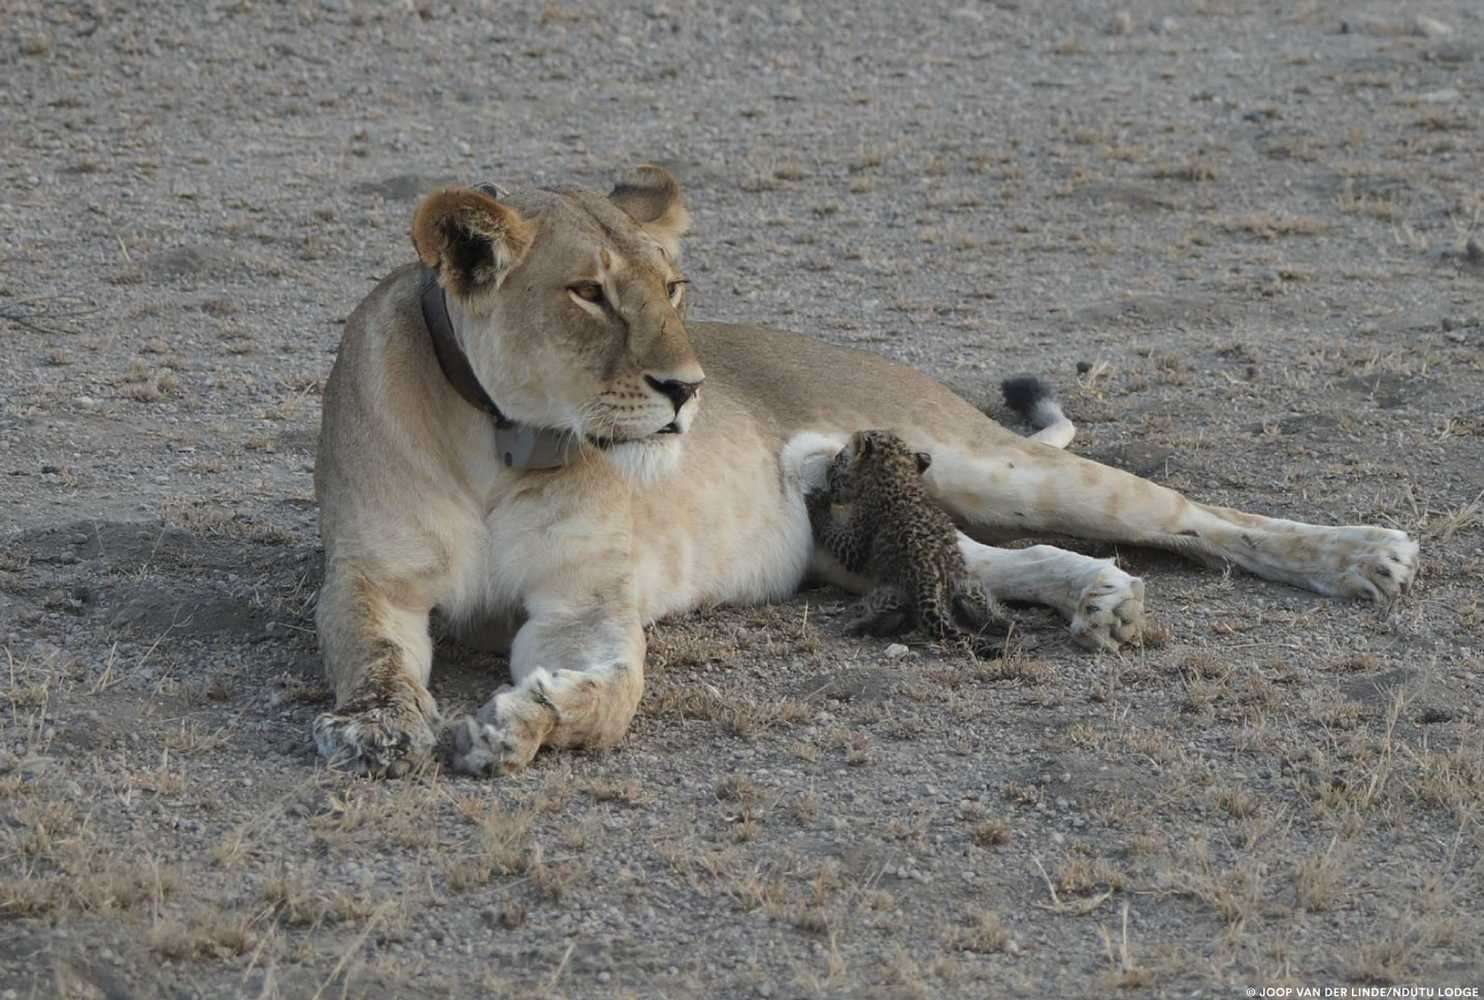 image for For the first time, a wild lioness is photographed nursing a baby leopard